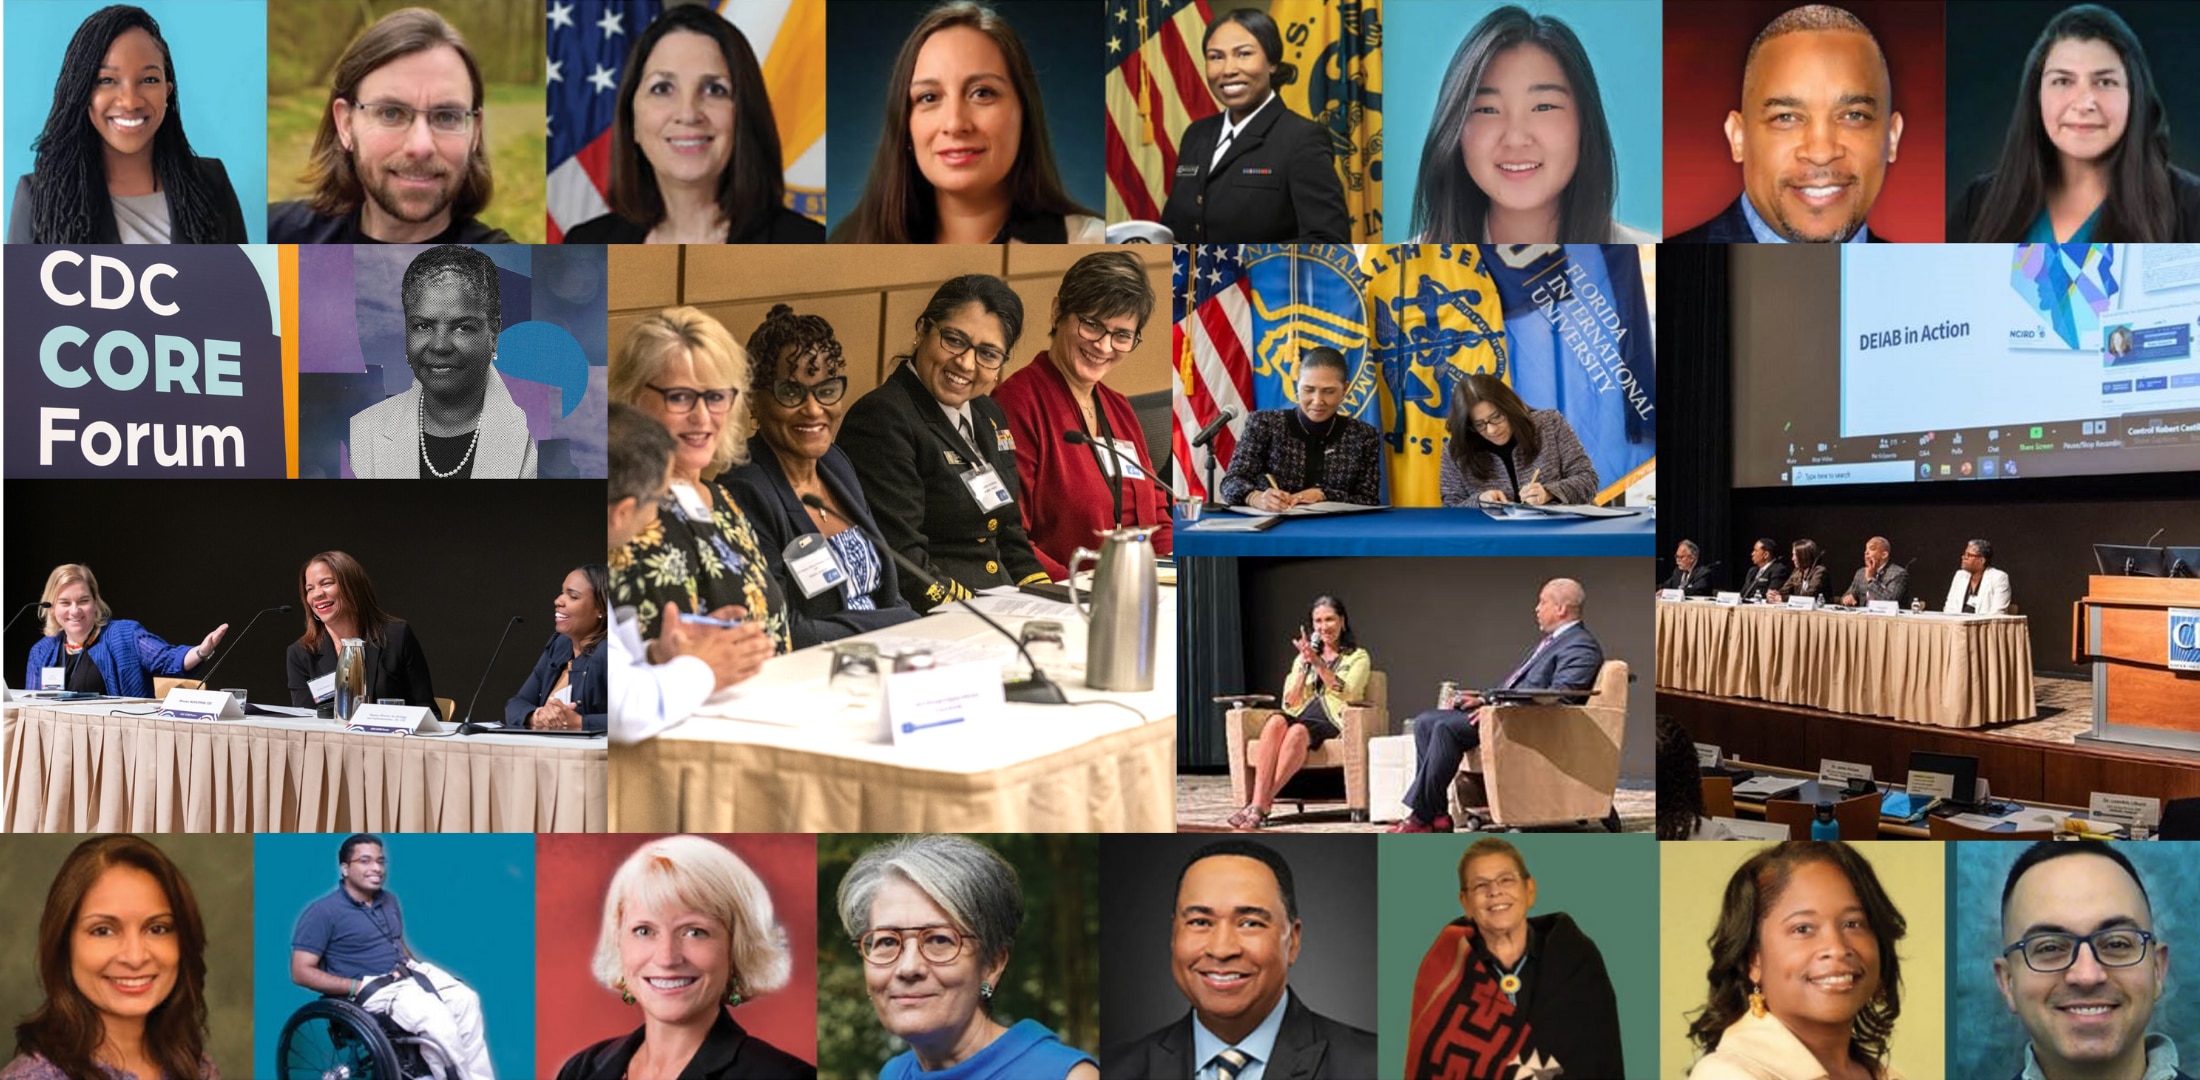 Collage of CDC employees official portraits and at public and press events.